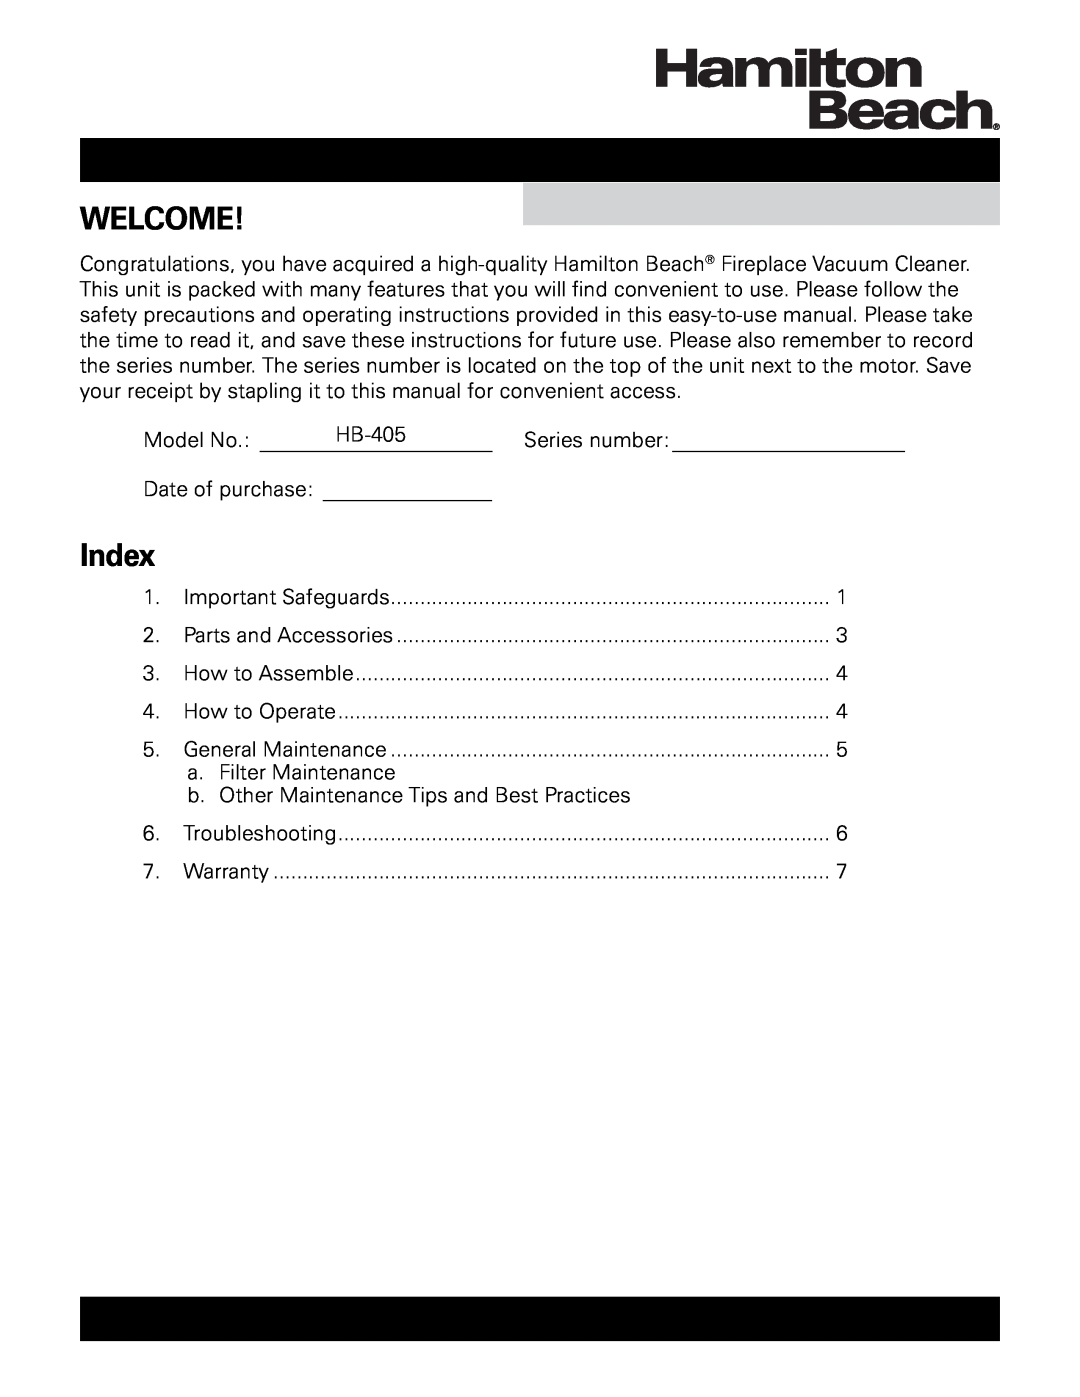 Hamilton Beach HB-405 owner manual Welcome, Index 